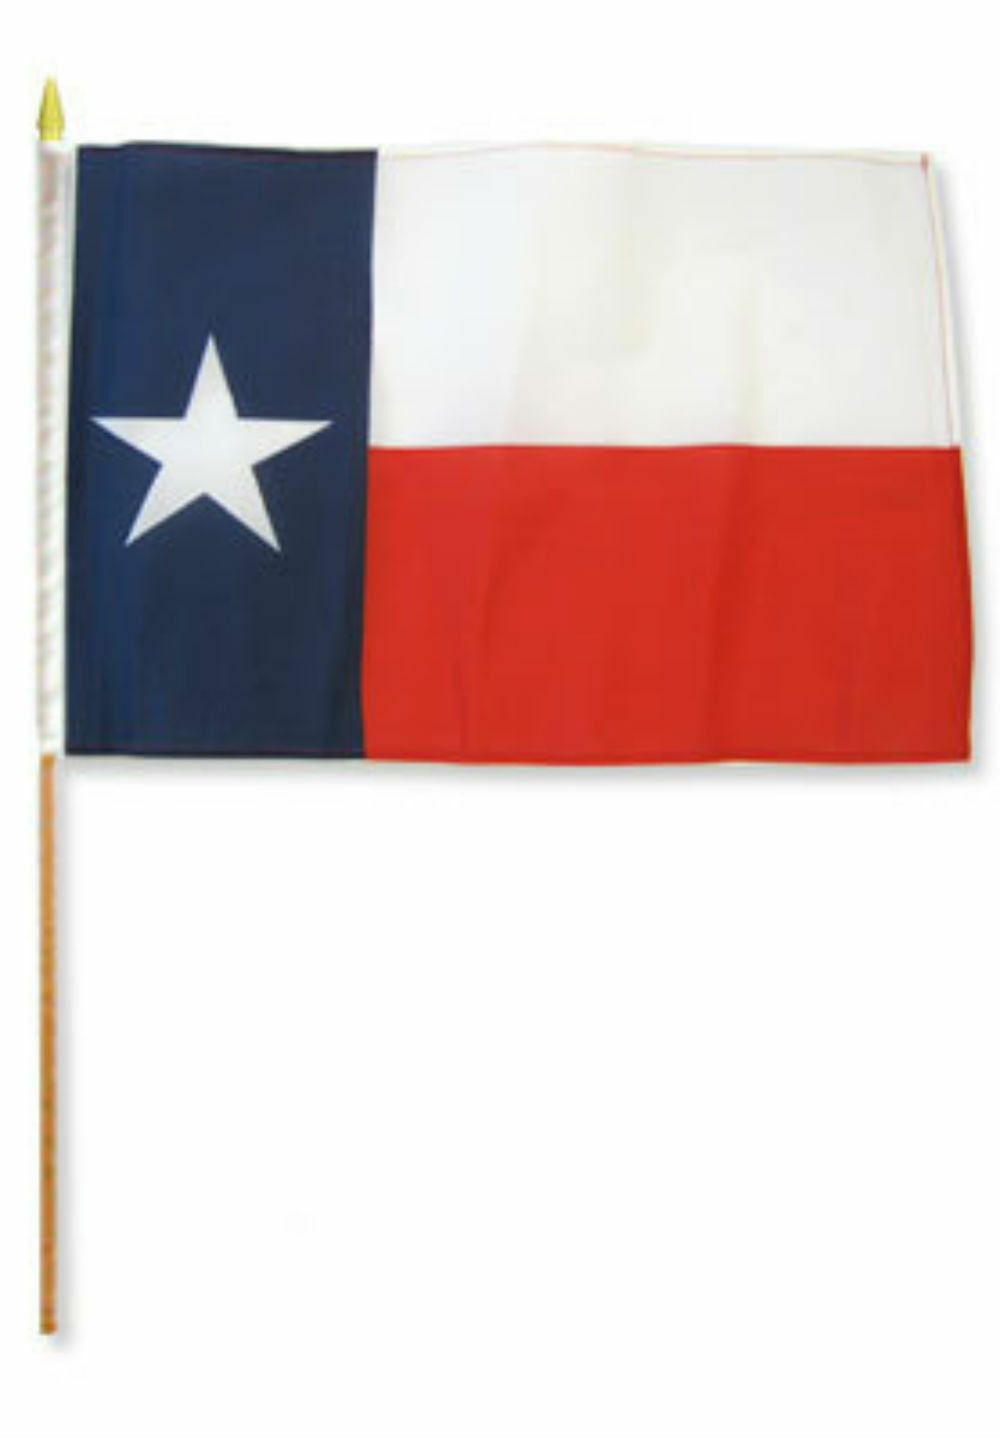 12x18 State of Texas 12"x18" Premium Nylon Embroidered 300D Flag Grommets RUF 